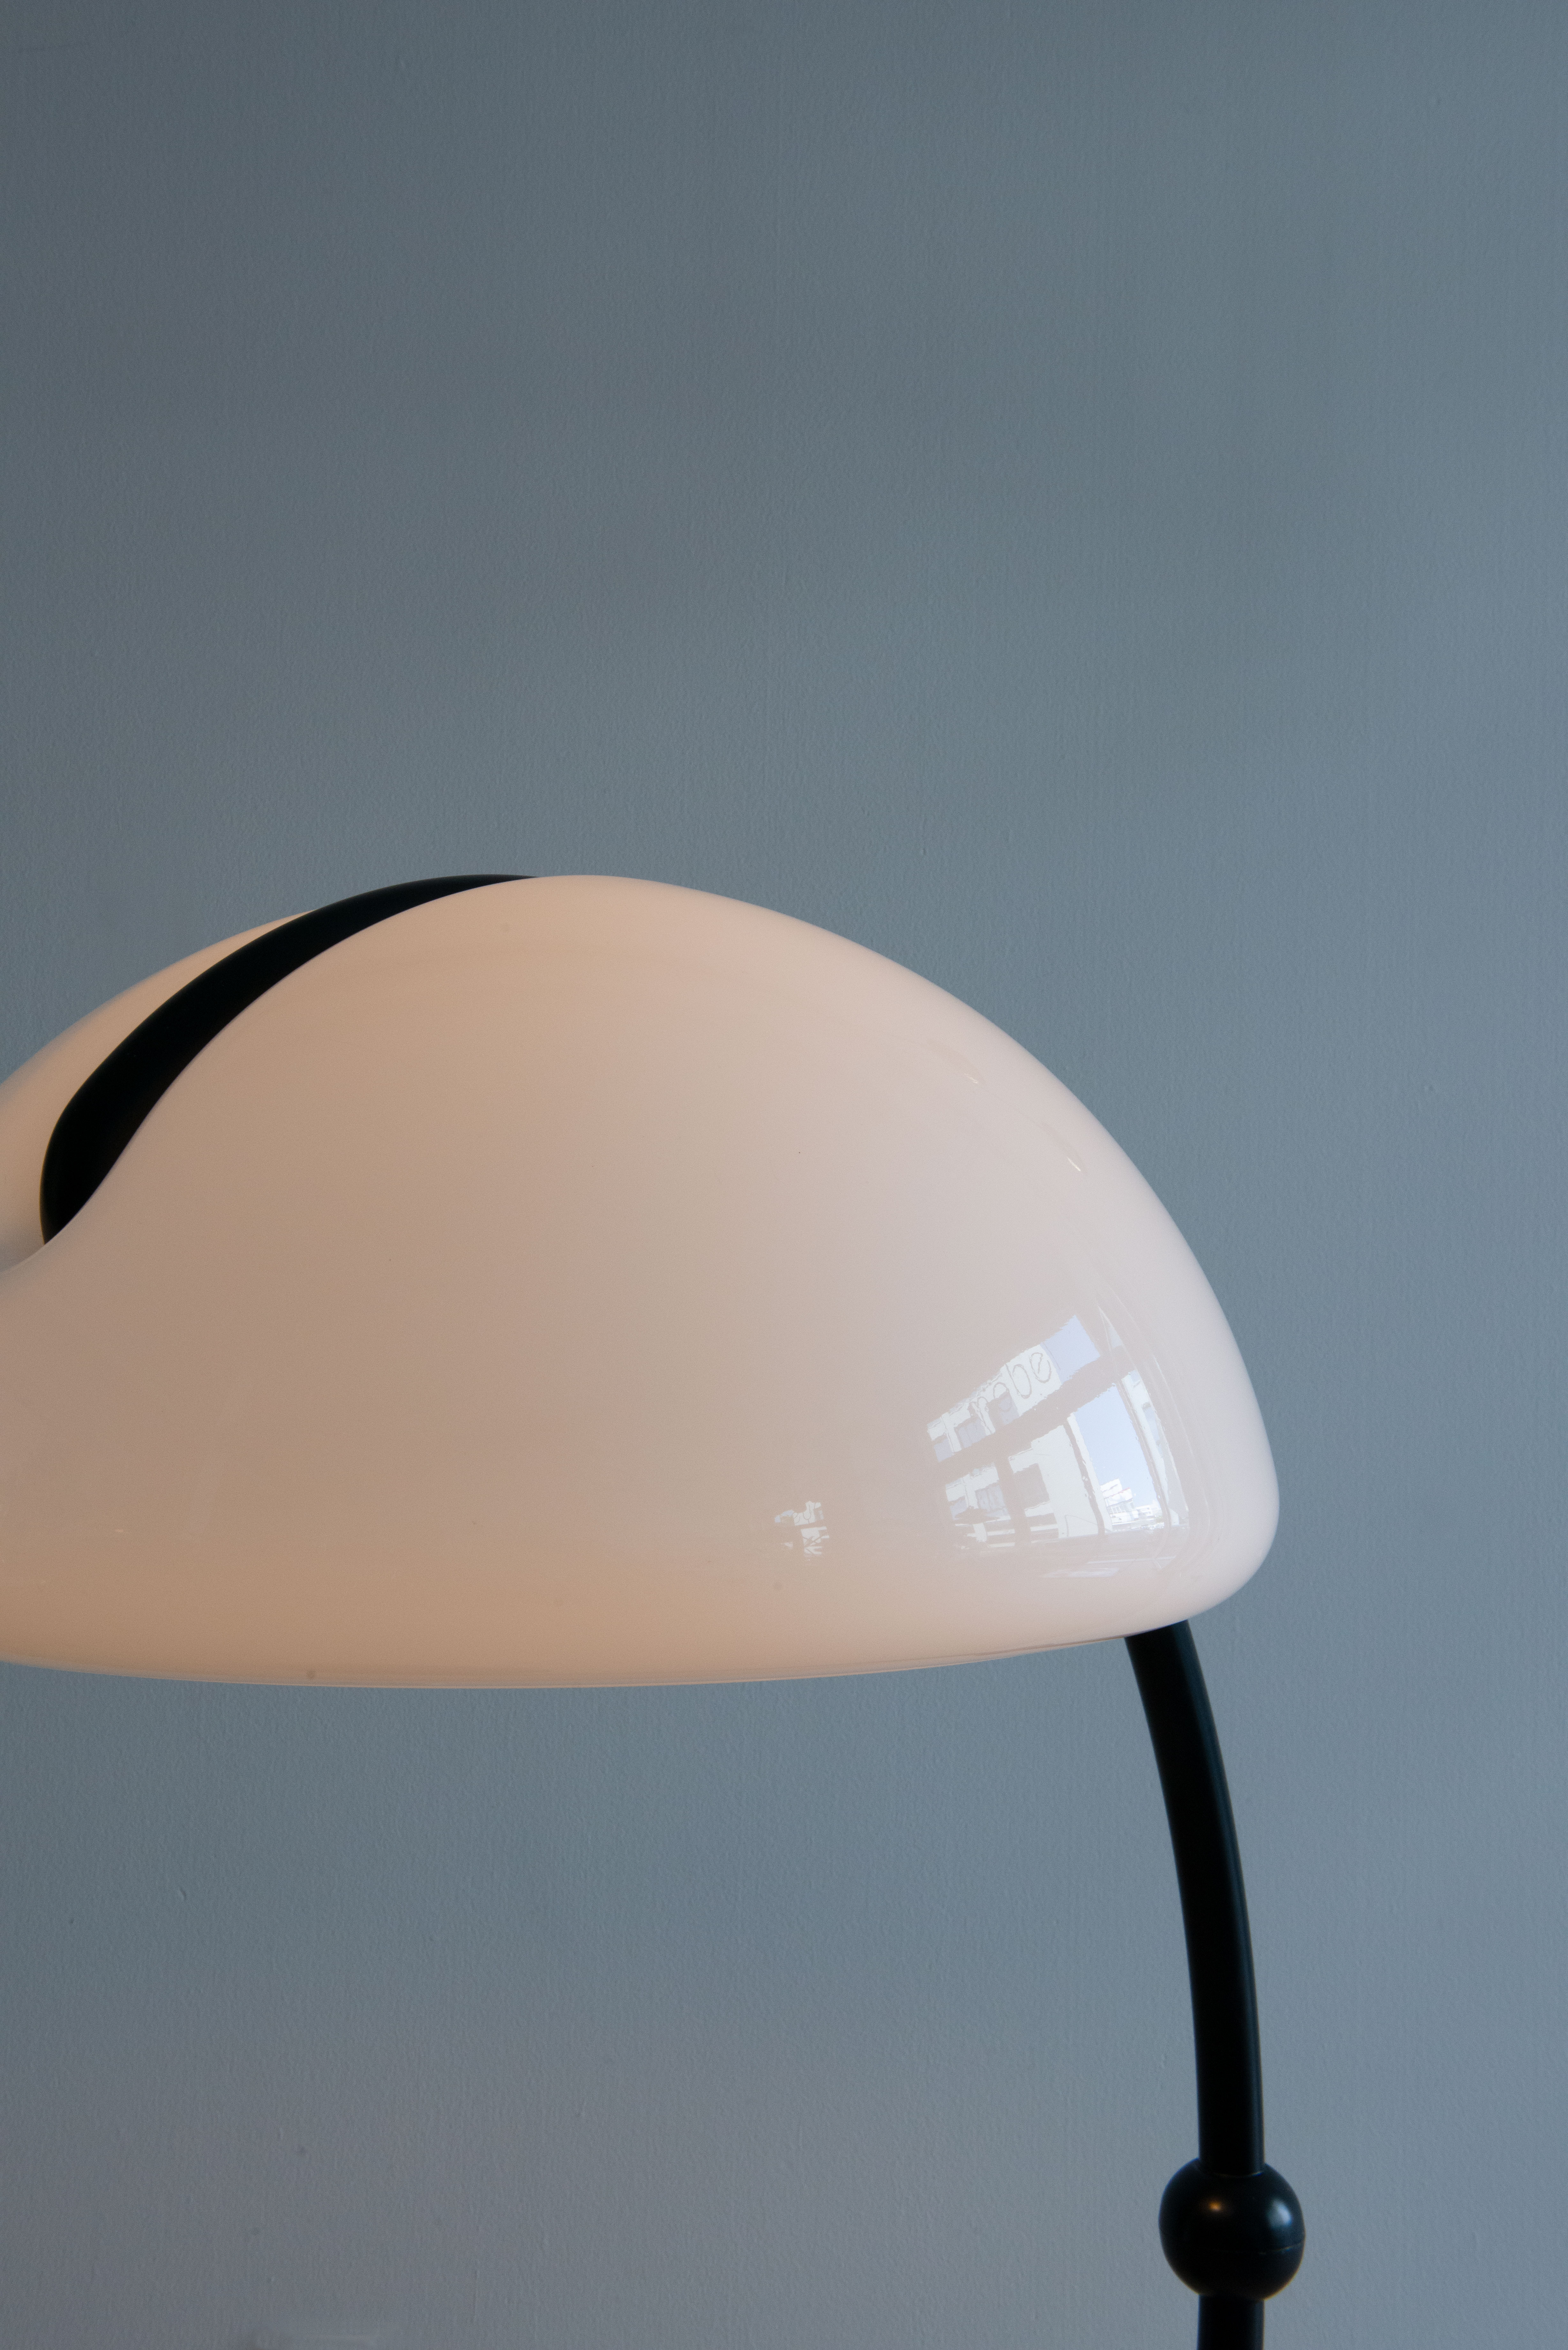 Serpente Floor Lamp in black with off-white shade. Designed by Elio Martinelli for Martinelli Luce. Produced in Italy, 1960s. Available at heyday möbel, Grubenstrasse 19, 8045 Zürich, Switzerland.